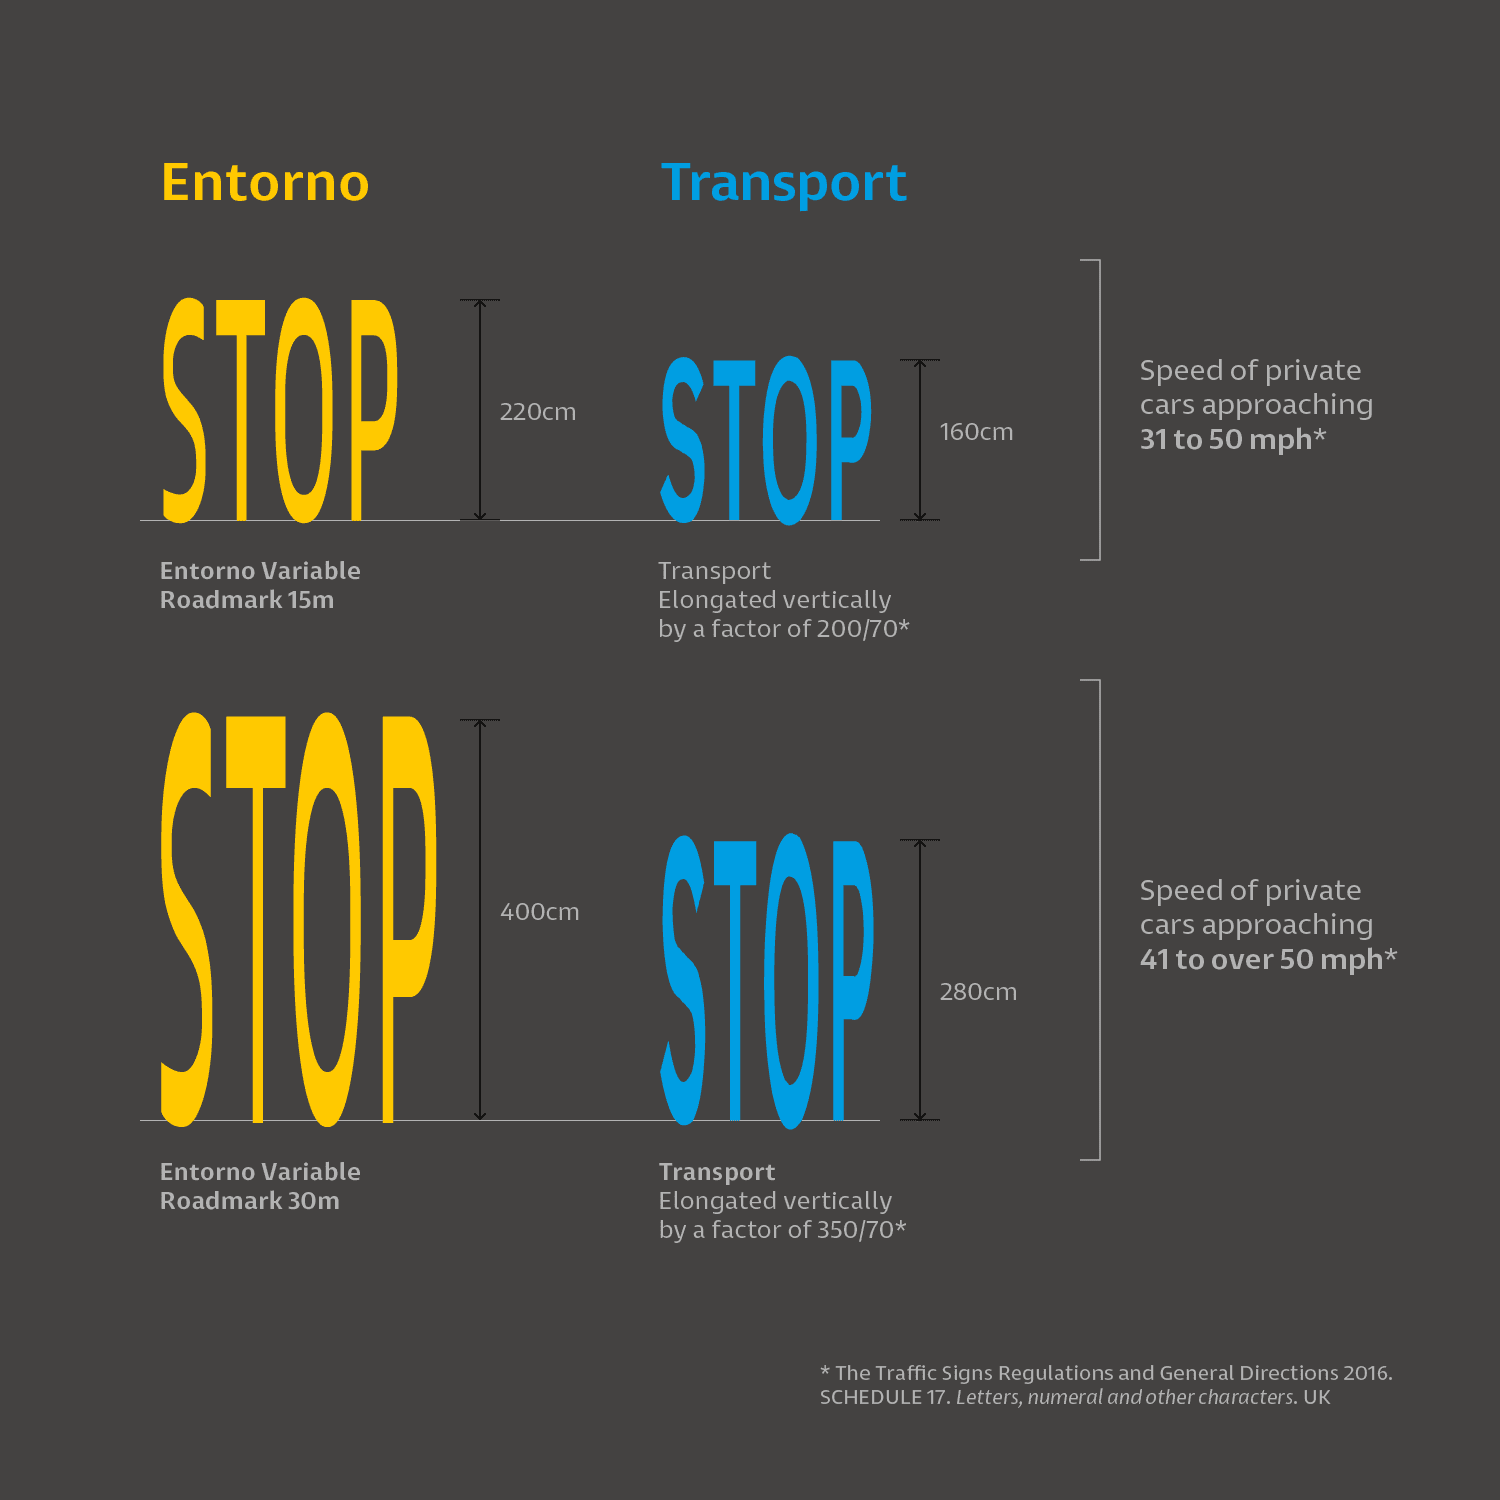 Comparison between Entorno and Transport